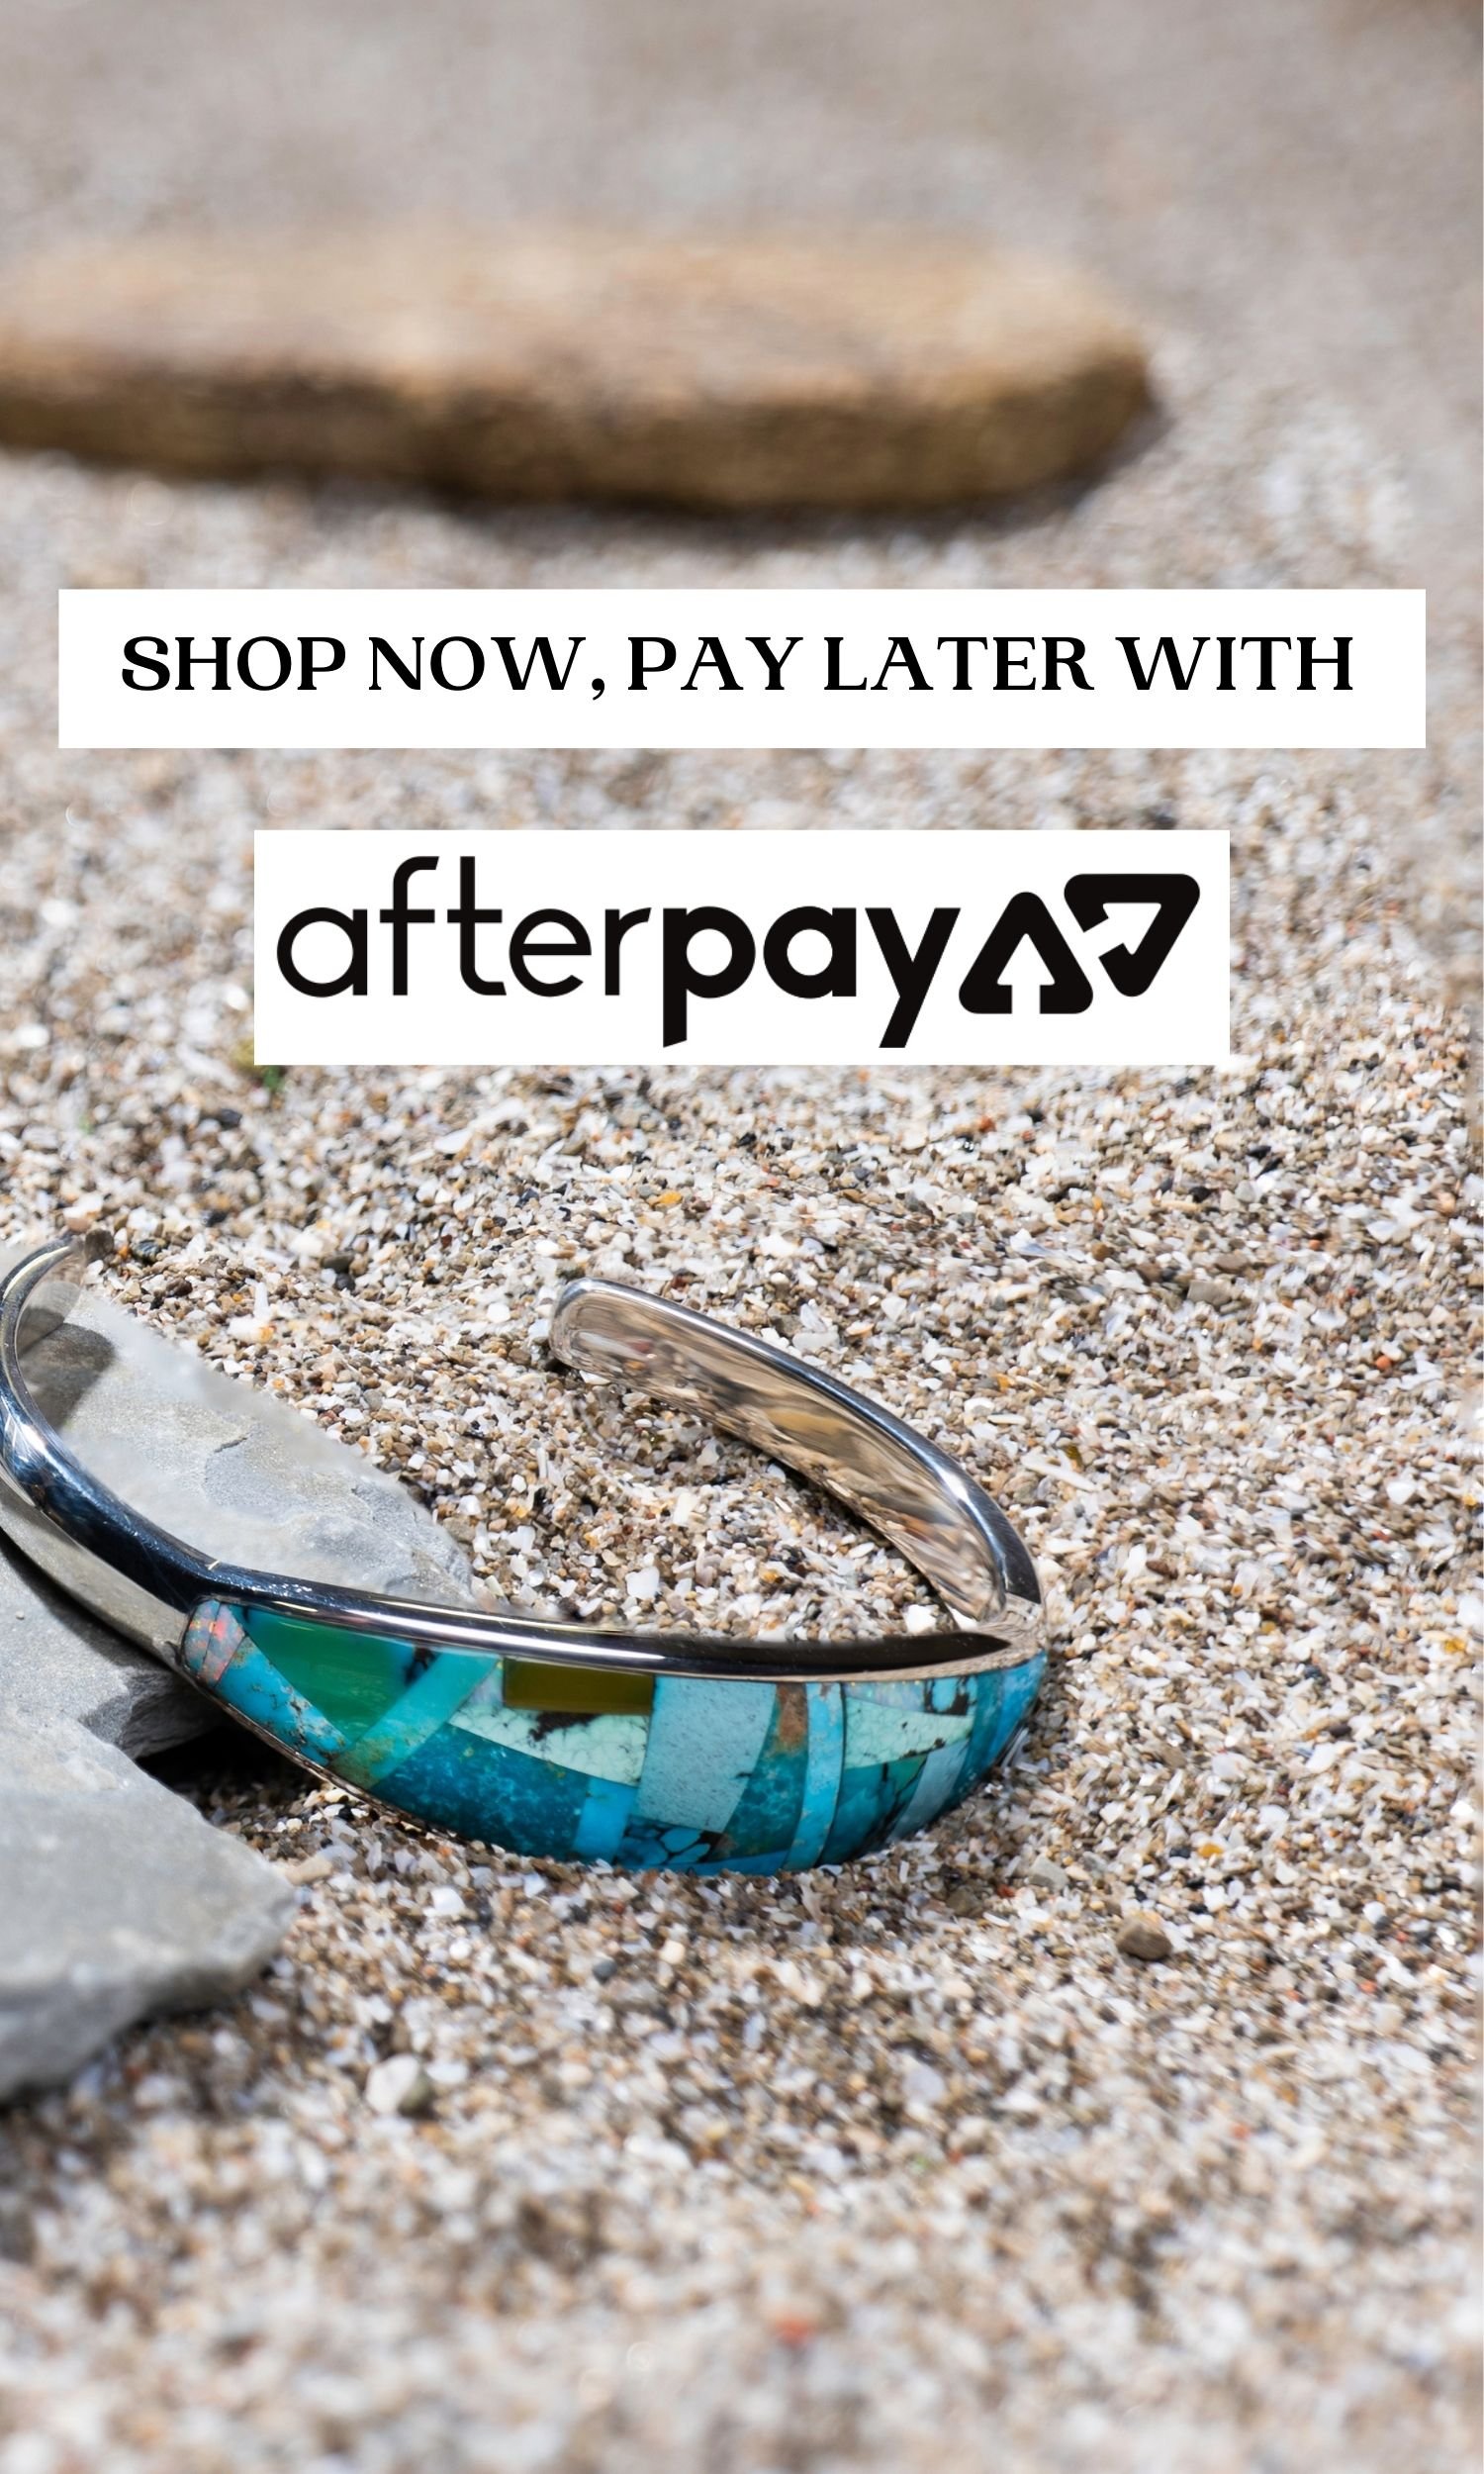 K-pay Europe – Wearable Payments with Contactless Jewellery – Quick,  convenient and stylish